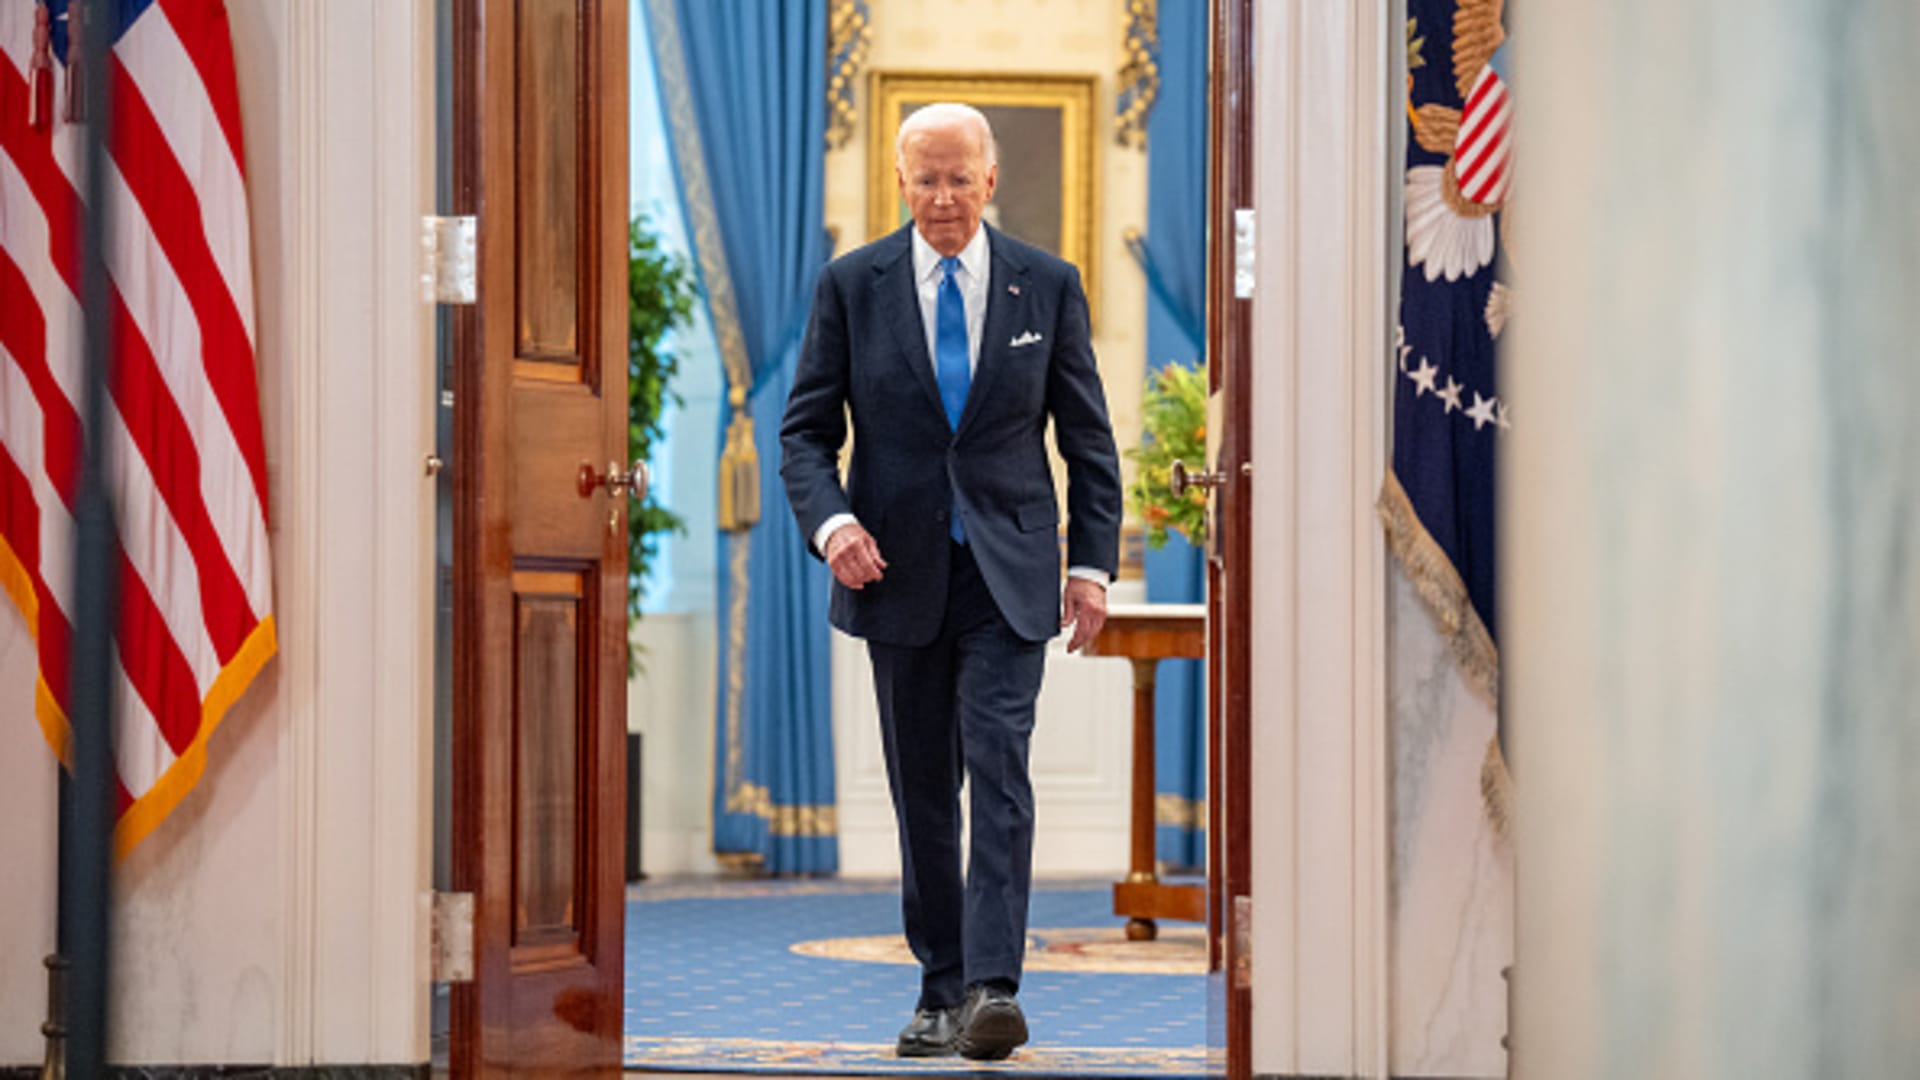 Some Democrats say Biden's debate performance was not an anomaly